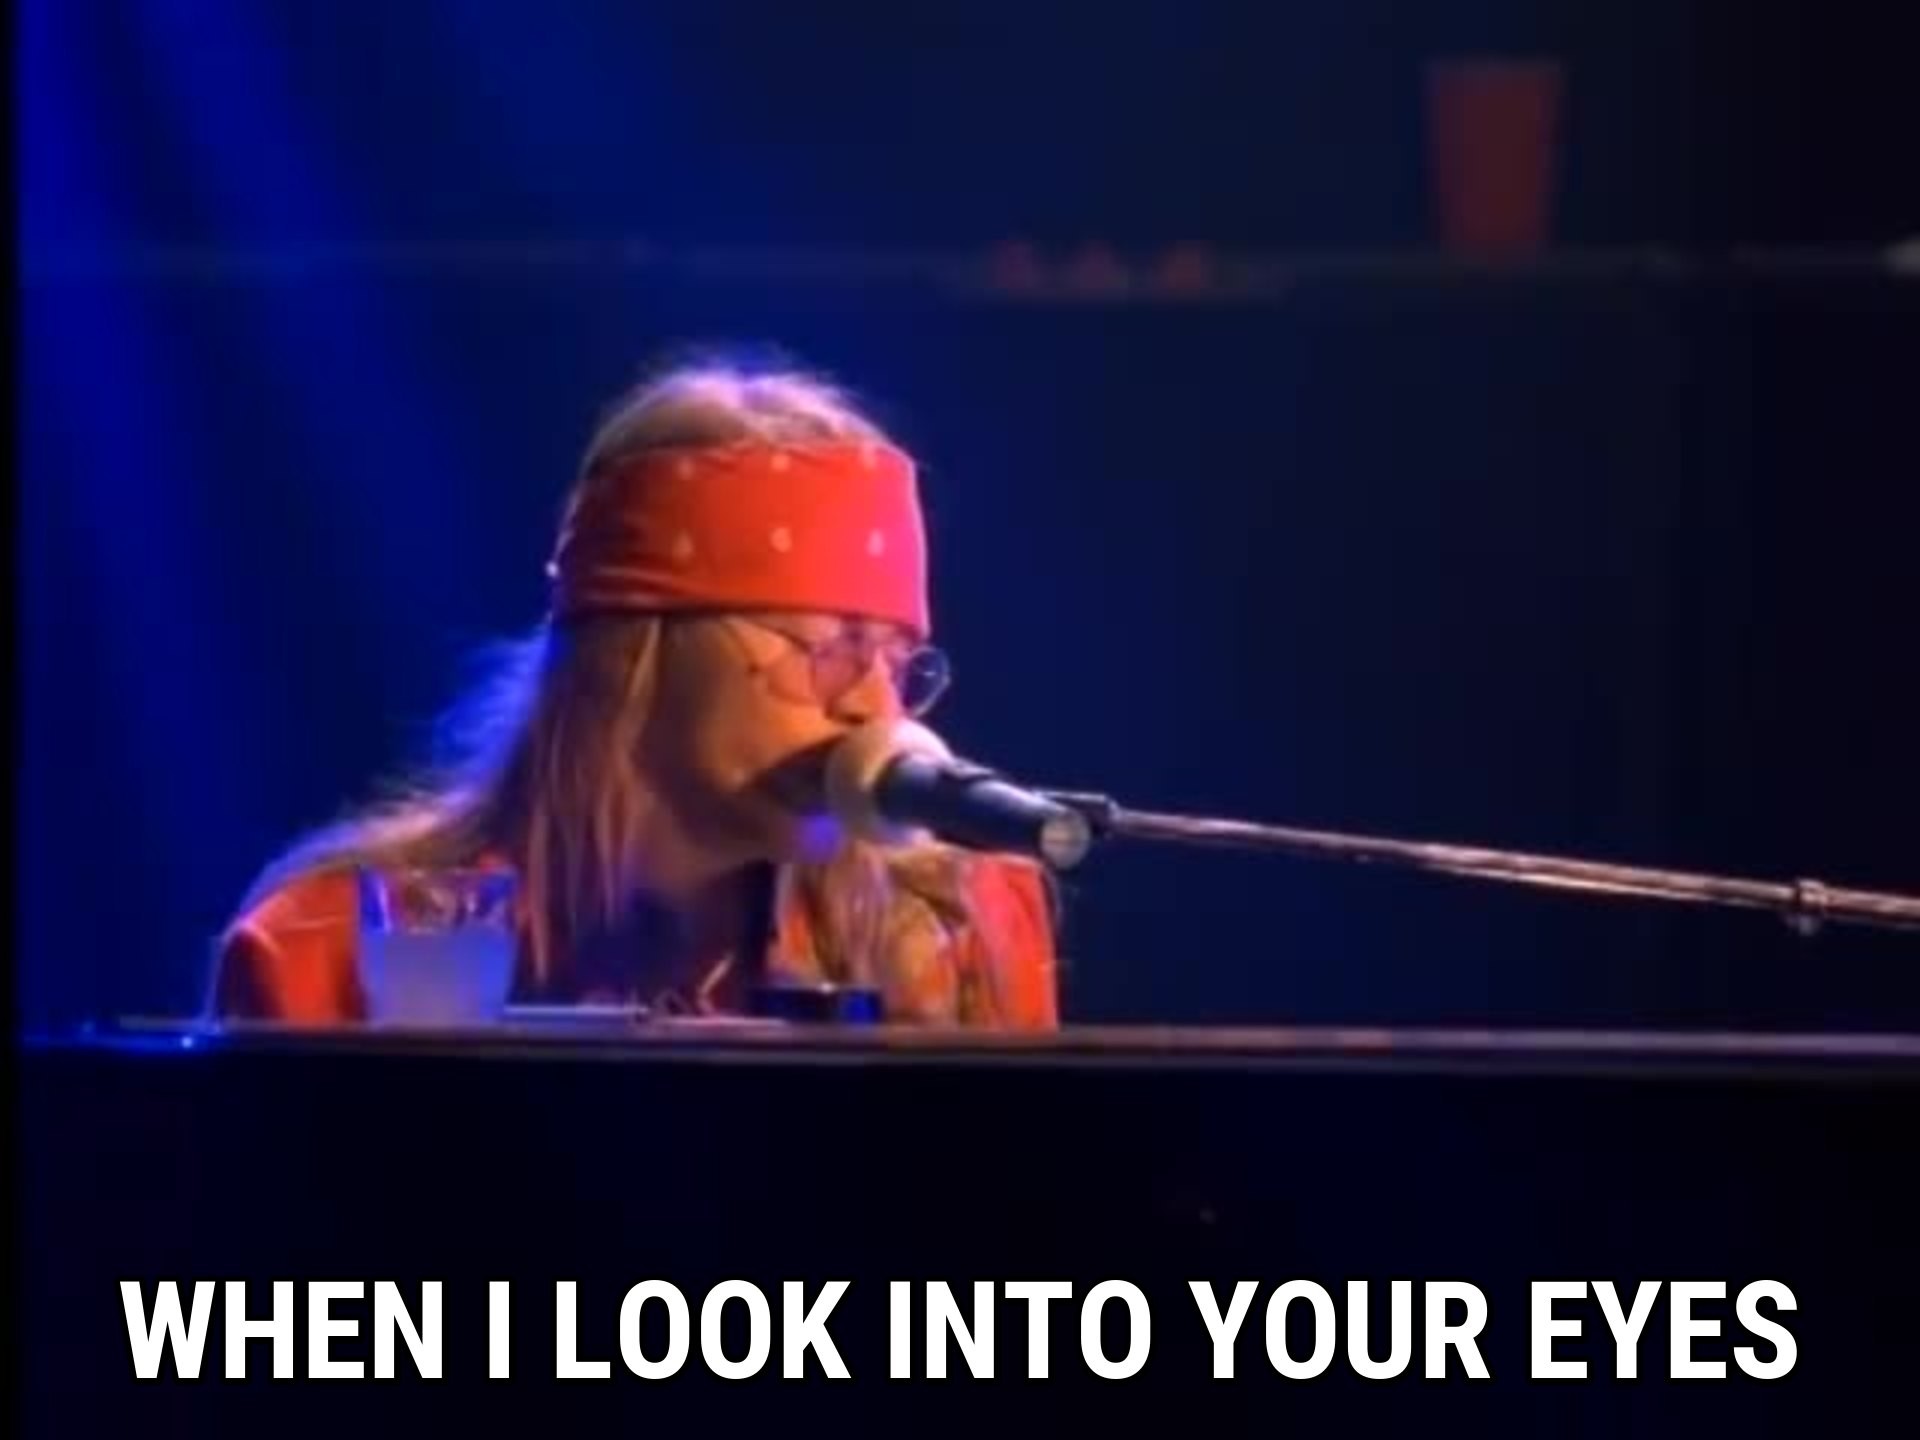 1920x1440 When I look into your eyes / Guns N' Roses